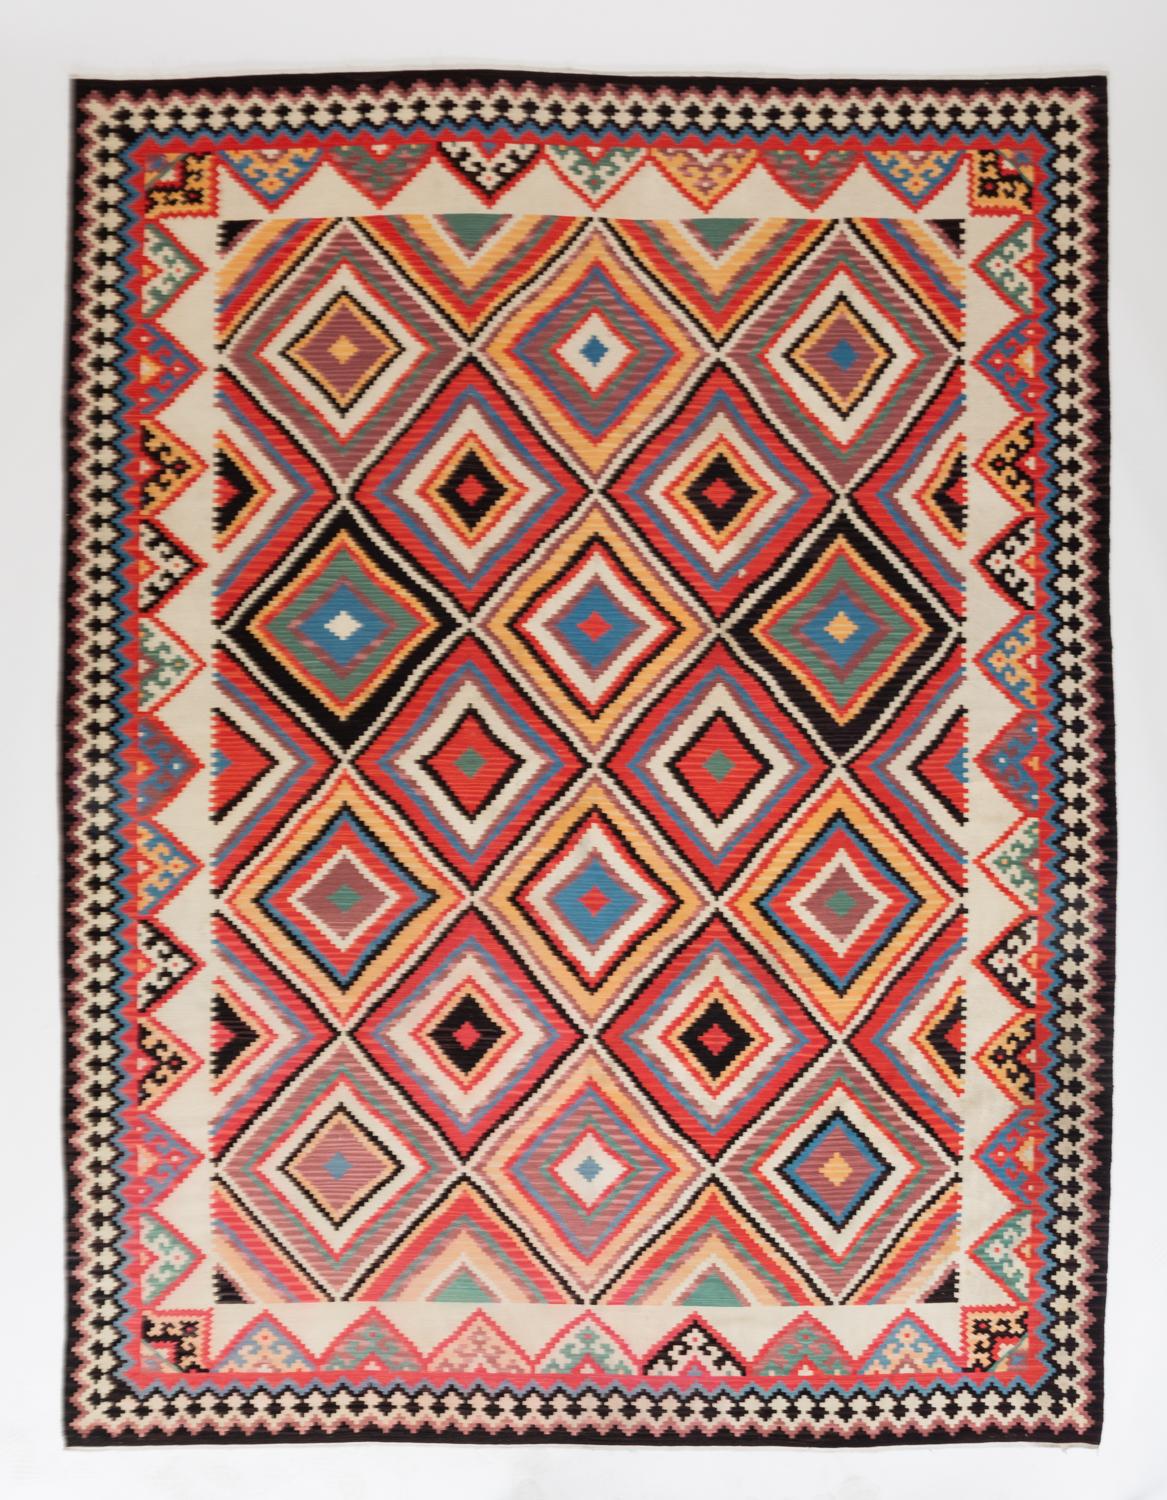 A traditionally woven Turkish Kilim area rug with a densely patterned design. The central field has a repeating diamond motif, surrounded by an off-white border and further dynamic geometry. Woven in wool and cotton fibers with a bright color scheme